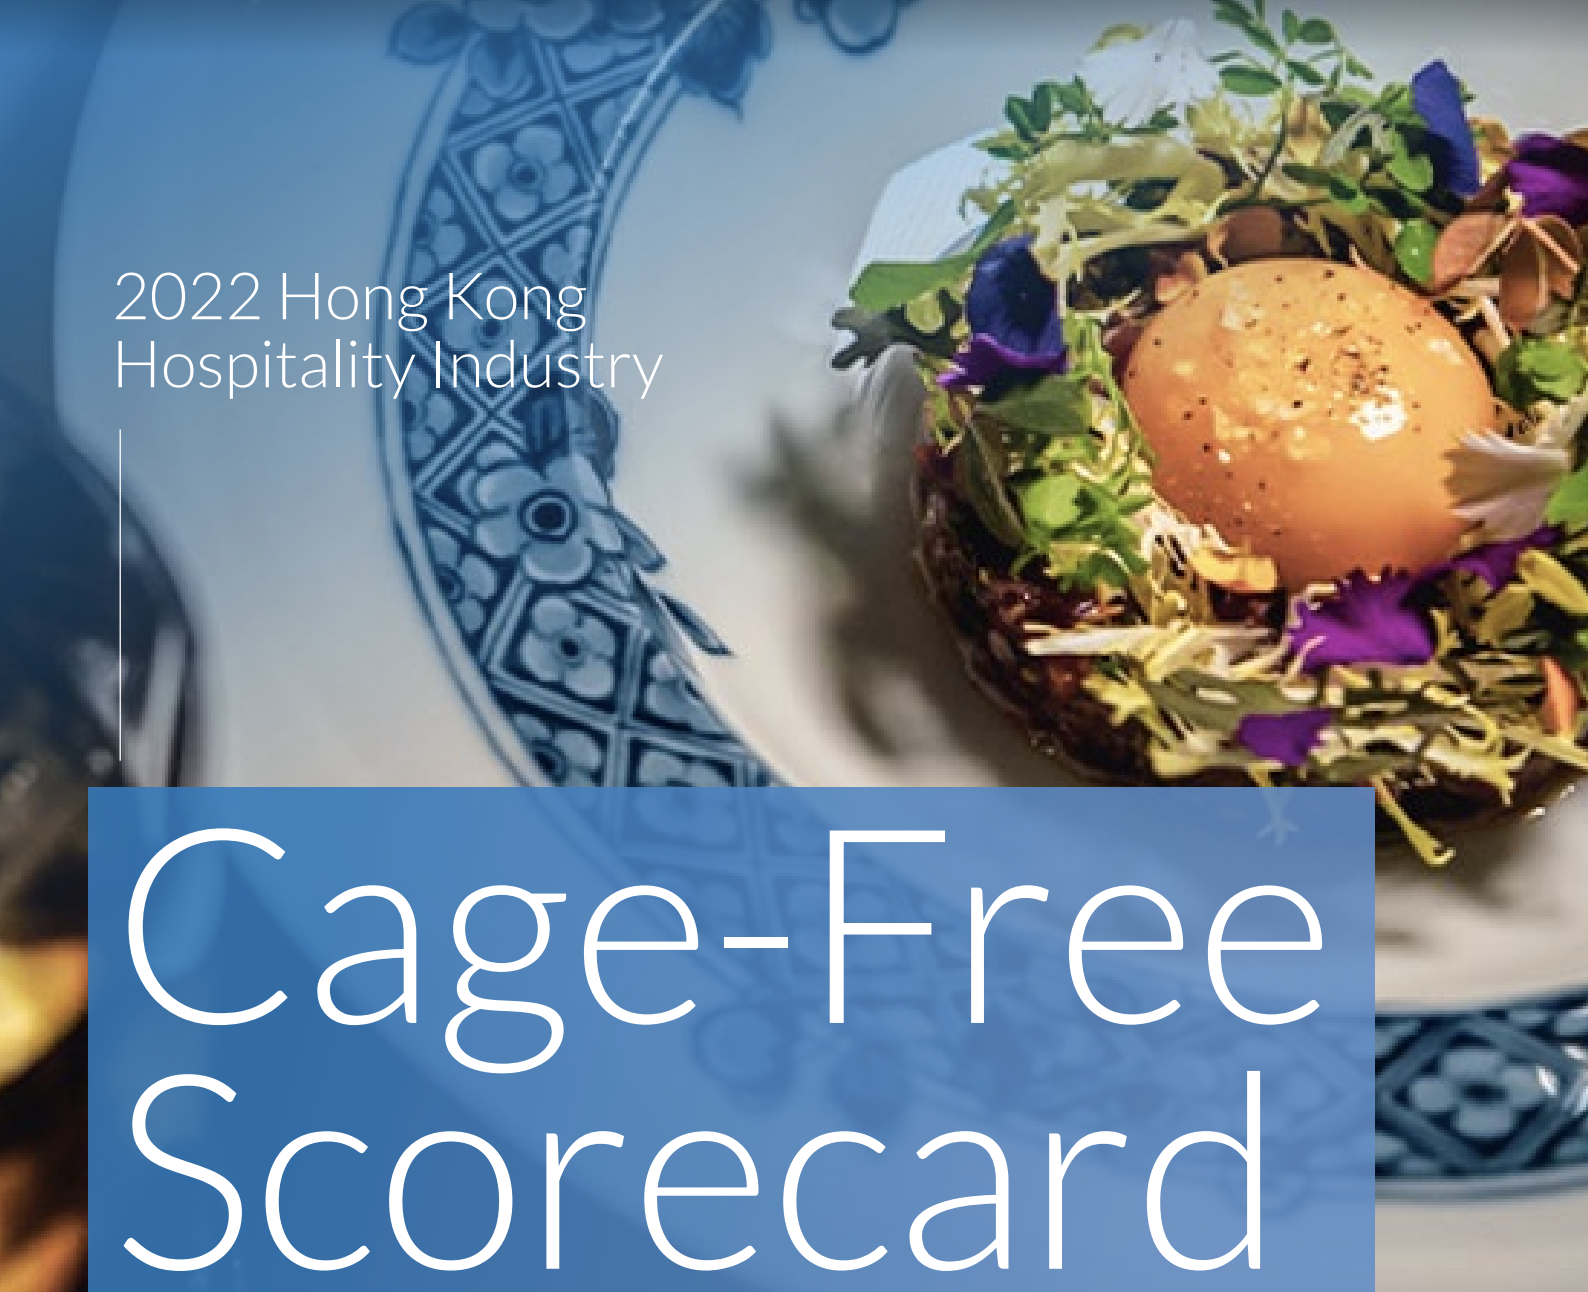 New Report Finds 75% of Hong Kong’s Hotel Industry Committed to Use Only Cage-Free Eggs Globally